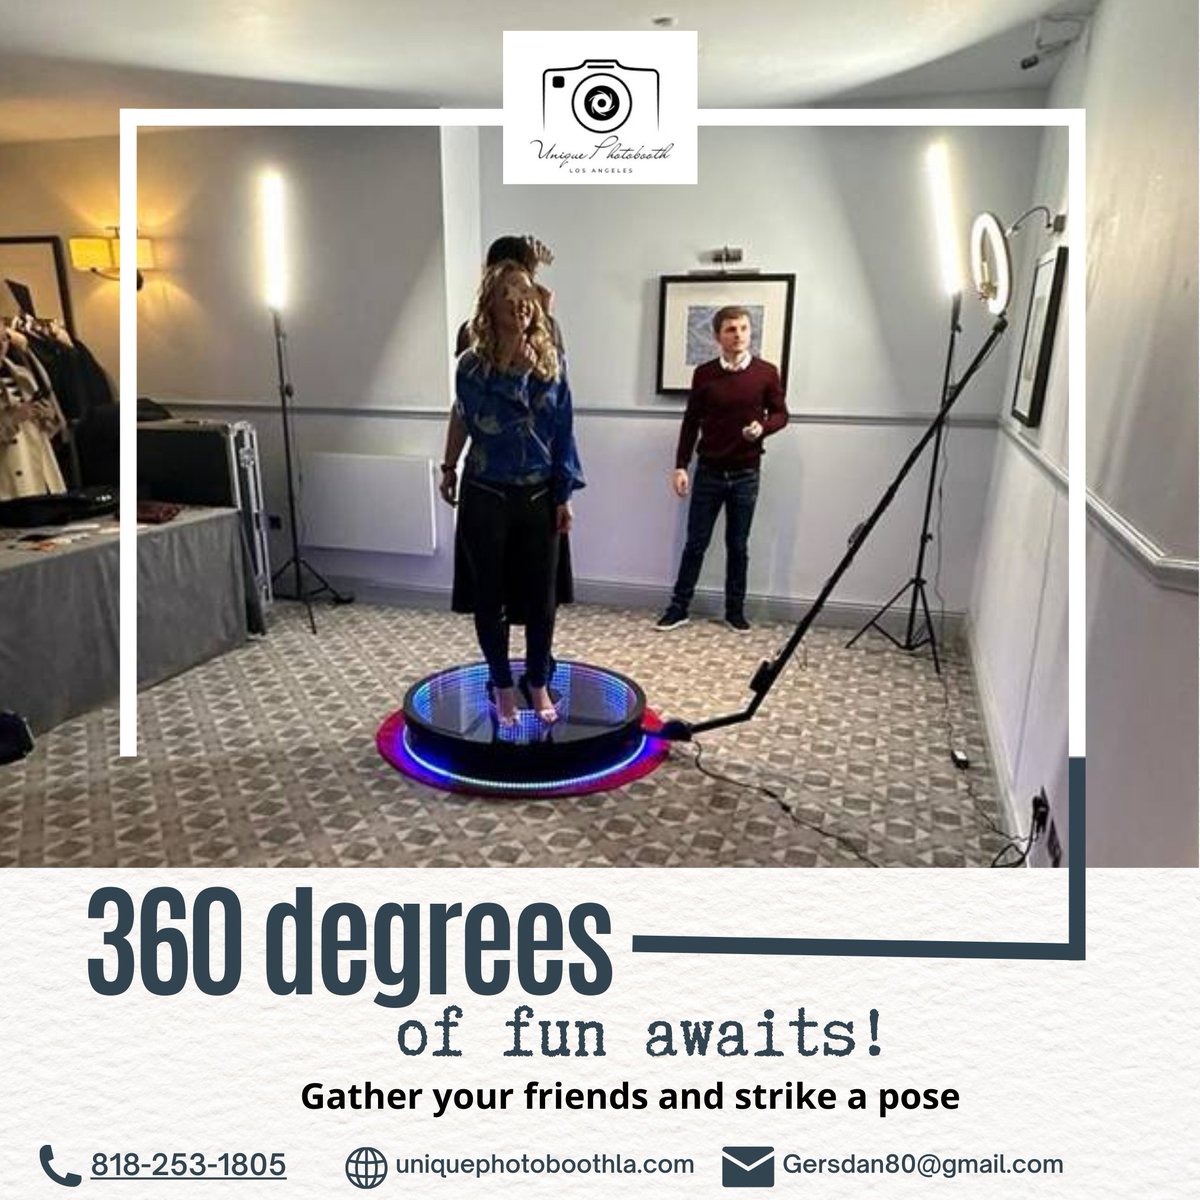 360-degree photos and videos are highly shareable on social media platforms.  

#360photobooth #photoboothrental #weddingphotobooth #partyrental #eventphotobooth #photoboothforrent #photobooth #Losangeles #balloons #flowers #weddings #SanFernandovalley #audioguestbook